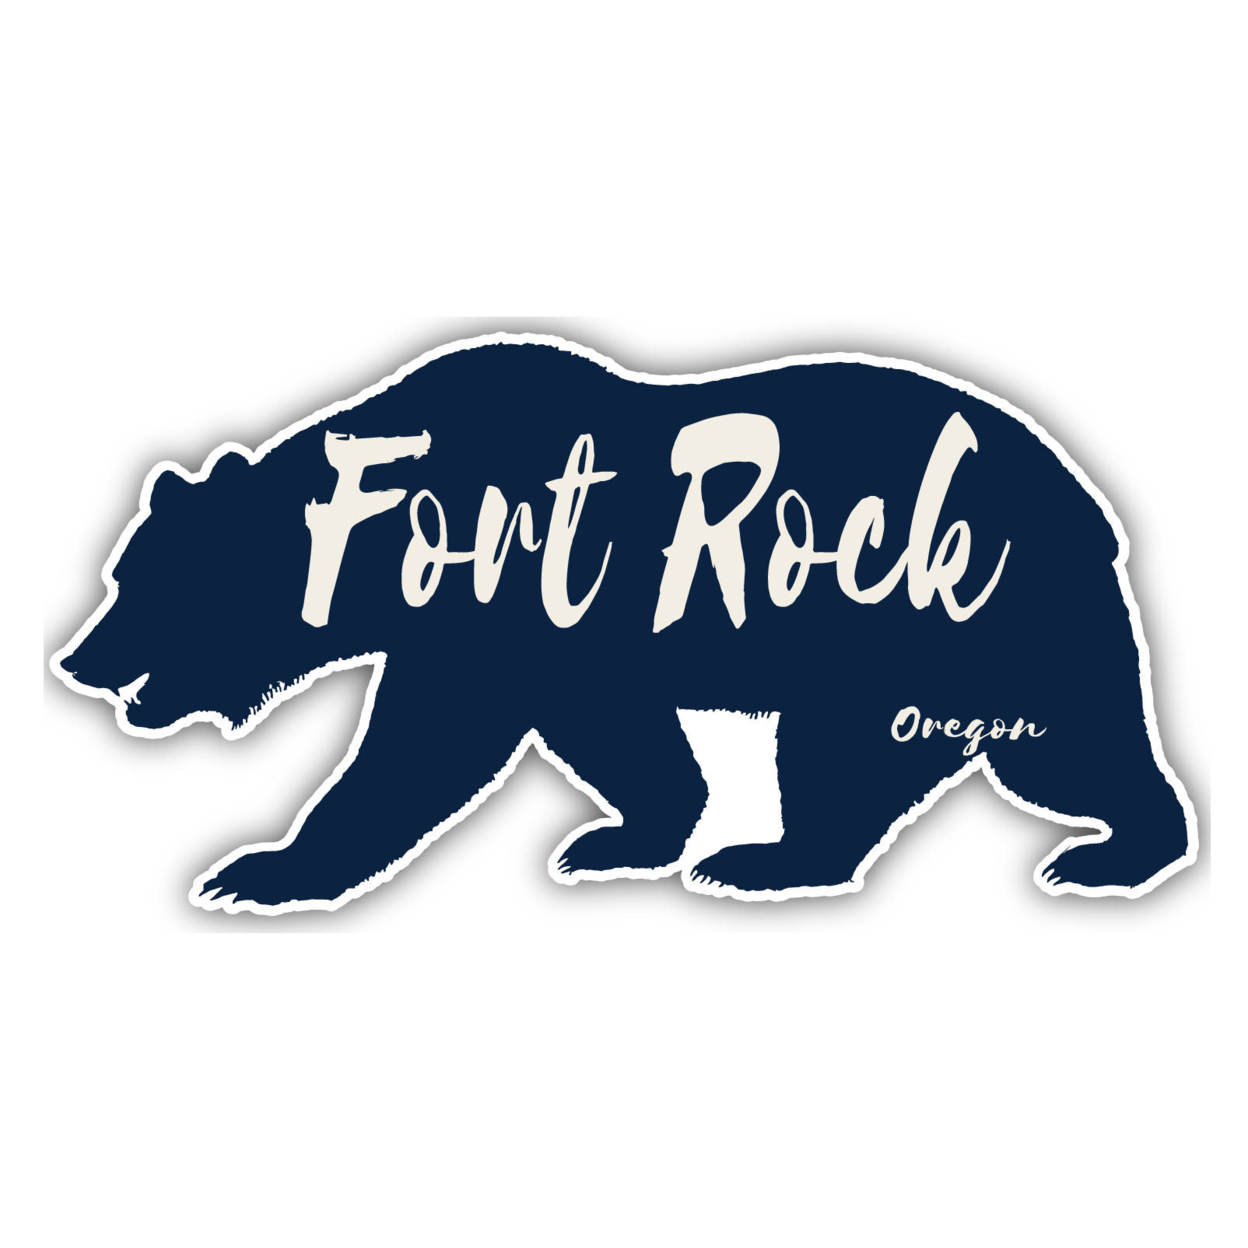 Fort Rock Oregon Souvenir Decorative Stickers (Choose Theme And Size) - 4-Pack, 2-Inch, Bear